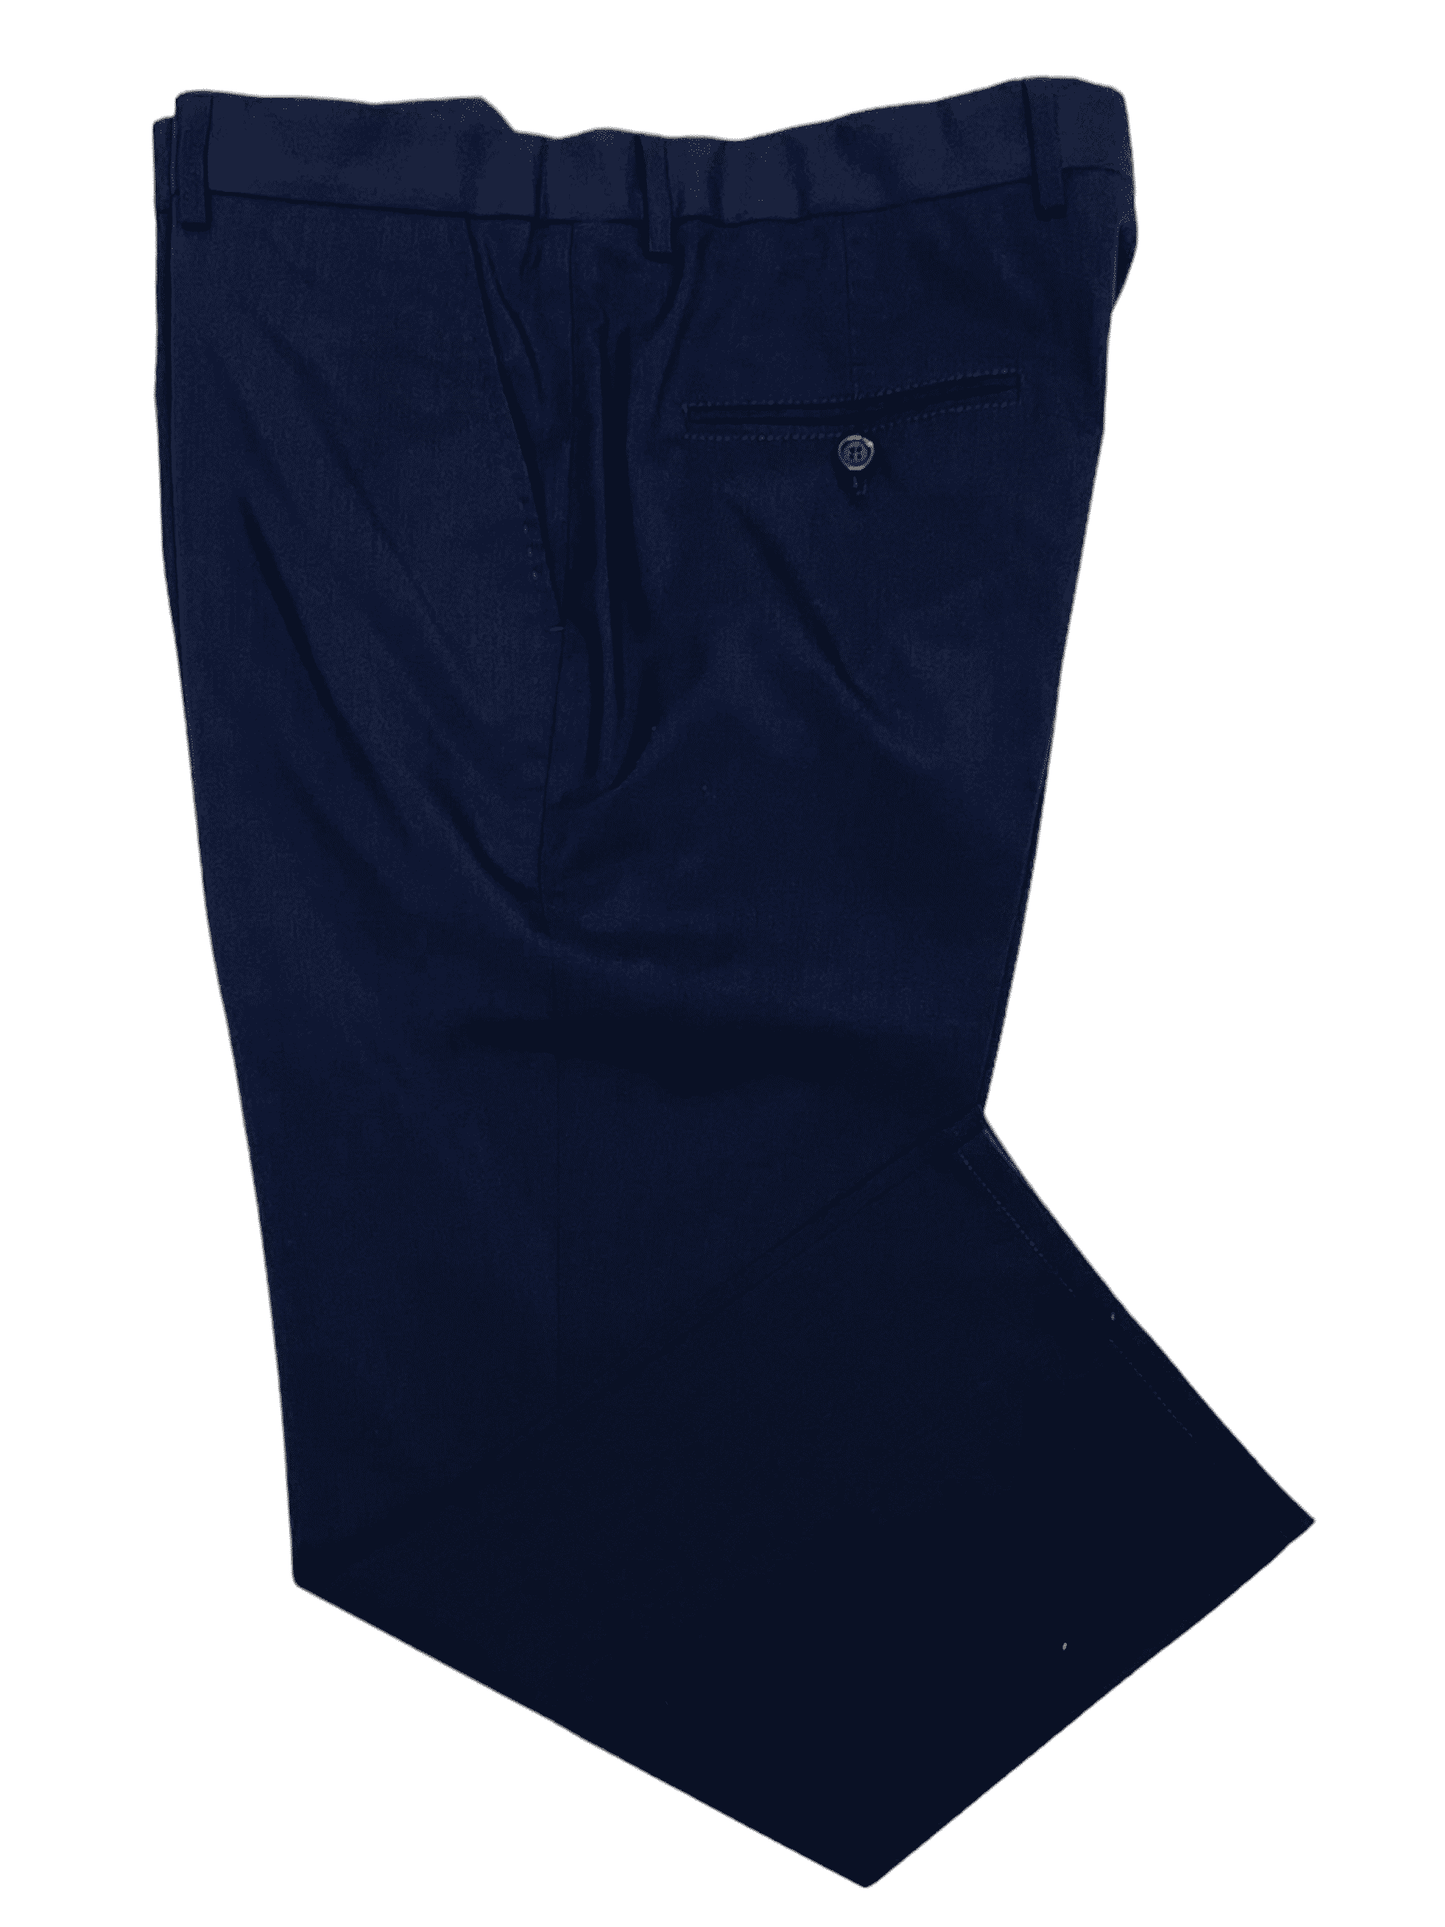 Brunello Cucinelli Navy Wool Dress Pant 34W 28L - Genuine Design Luxury Consignment Calgary, Alberta, Canada New and Pre-Owned Clothing, Shoes, Accessories.